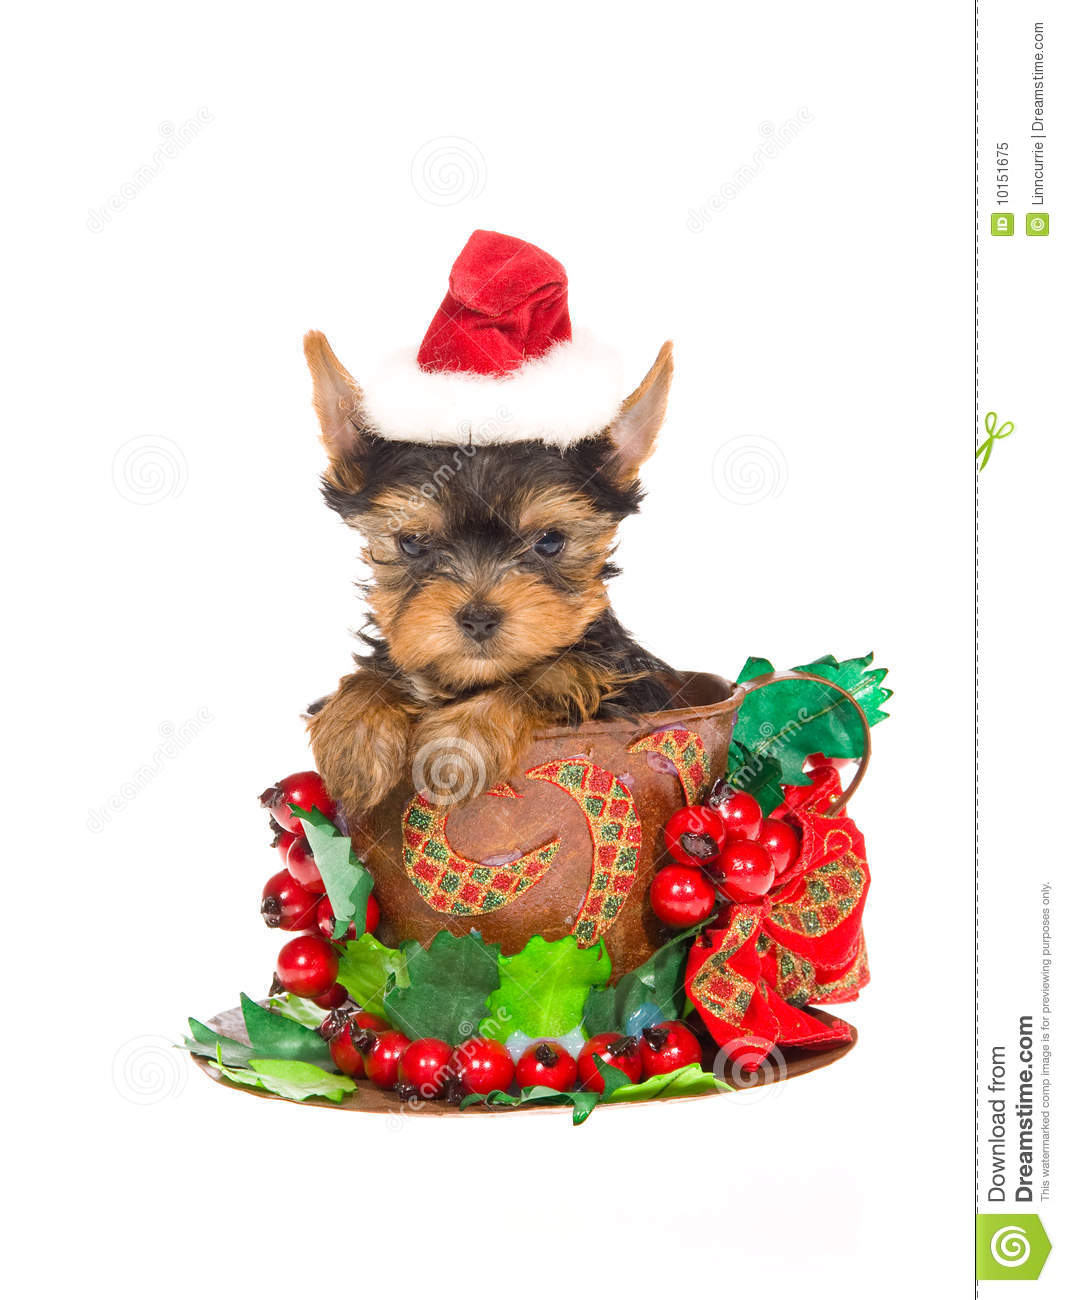 Yorkie Puppy Sitting Inside Large Cup With Christmas Berries And Bow    